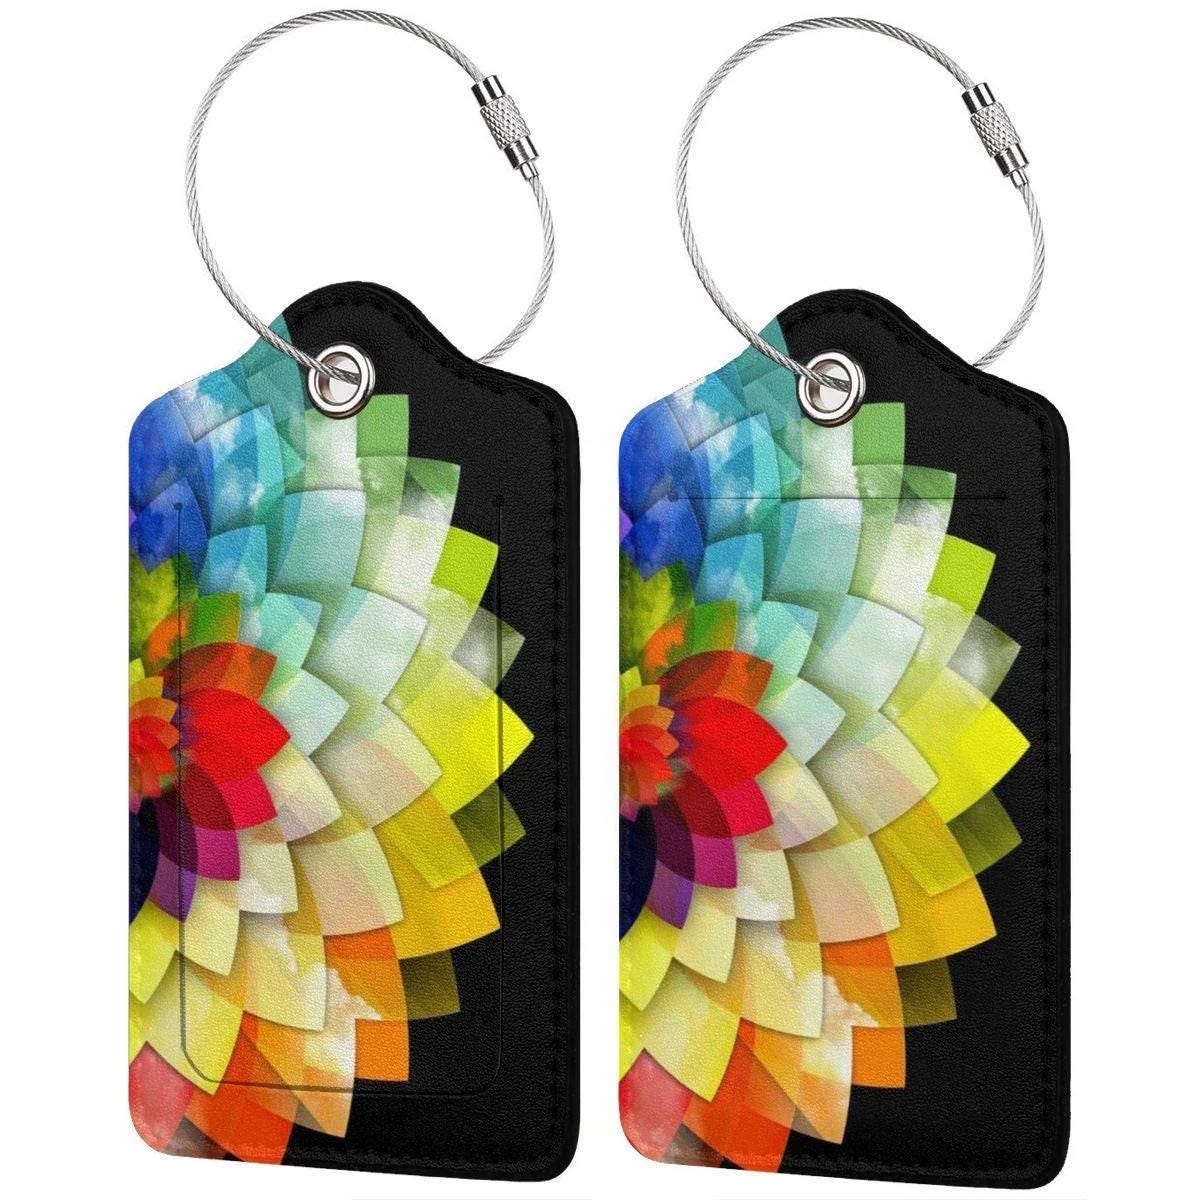 Colorful Flower Luggage Tags with Privacy Cover | Image